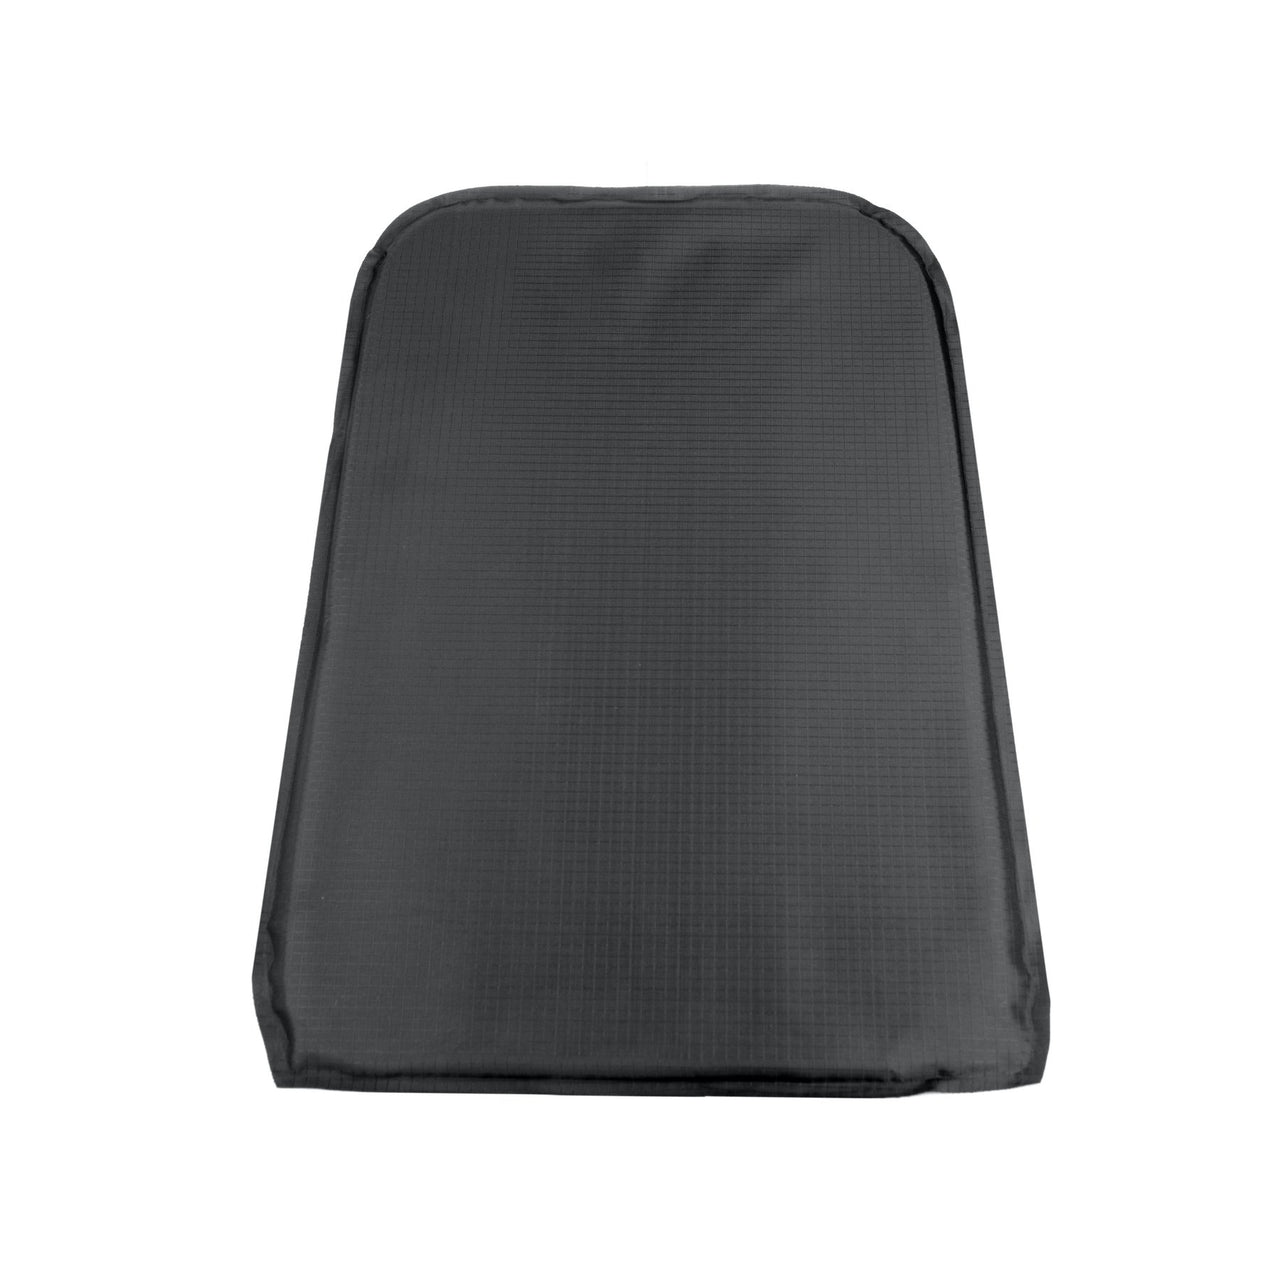 A Body Armor Direct black backpack on a white background.